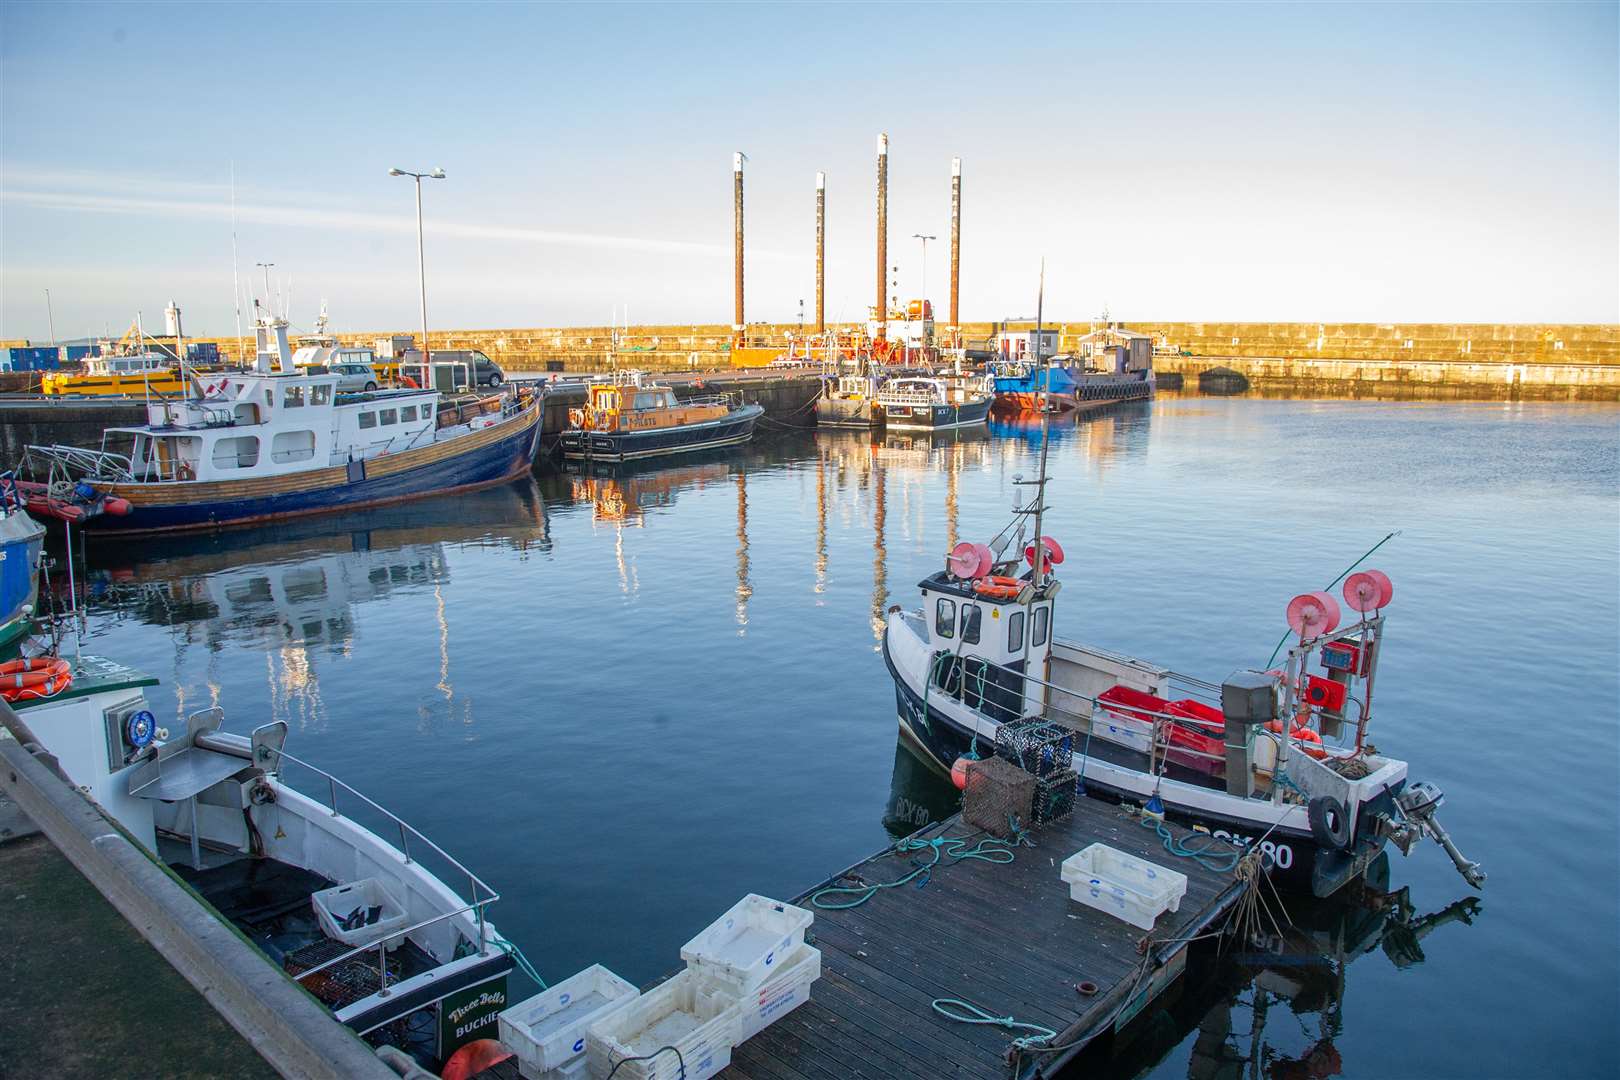 Fewer than two dozen boxes of fish were landed at Buckie Harbour last week.. Picture: Daniel Forsyth